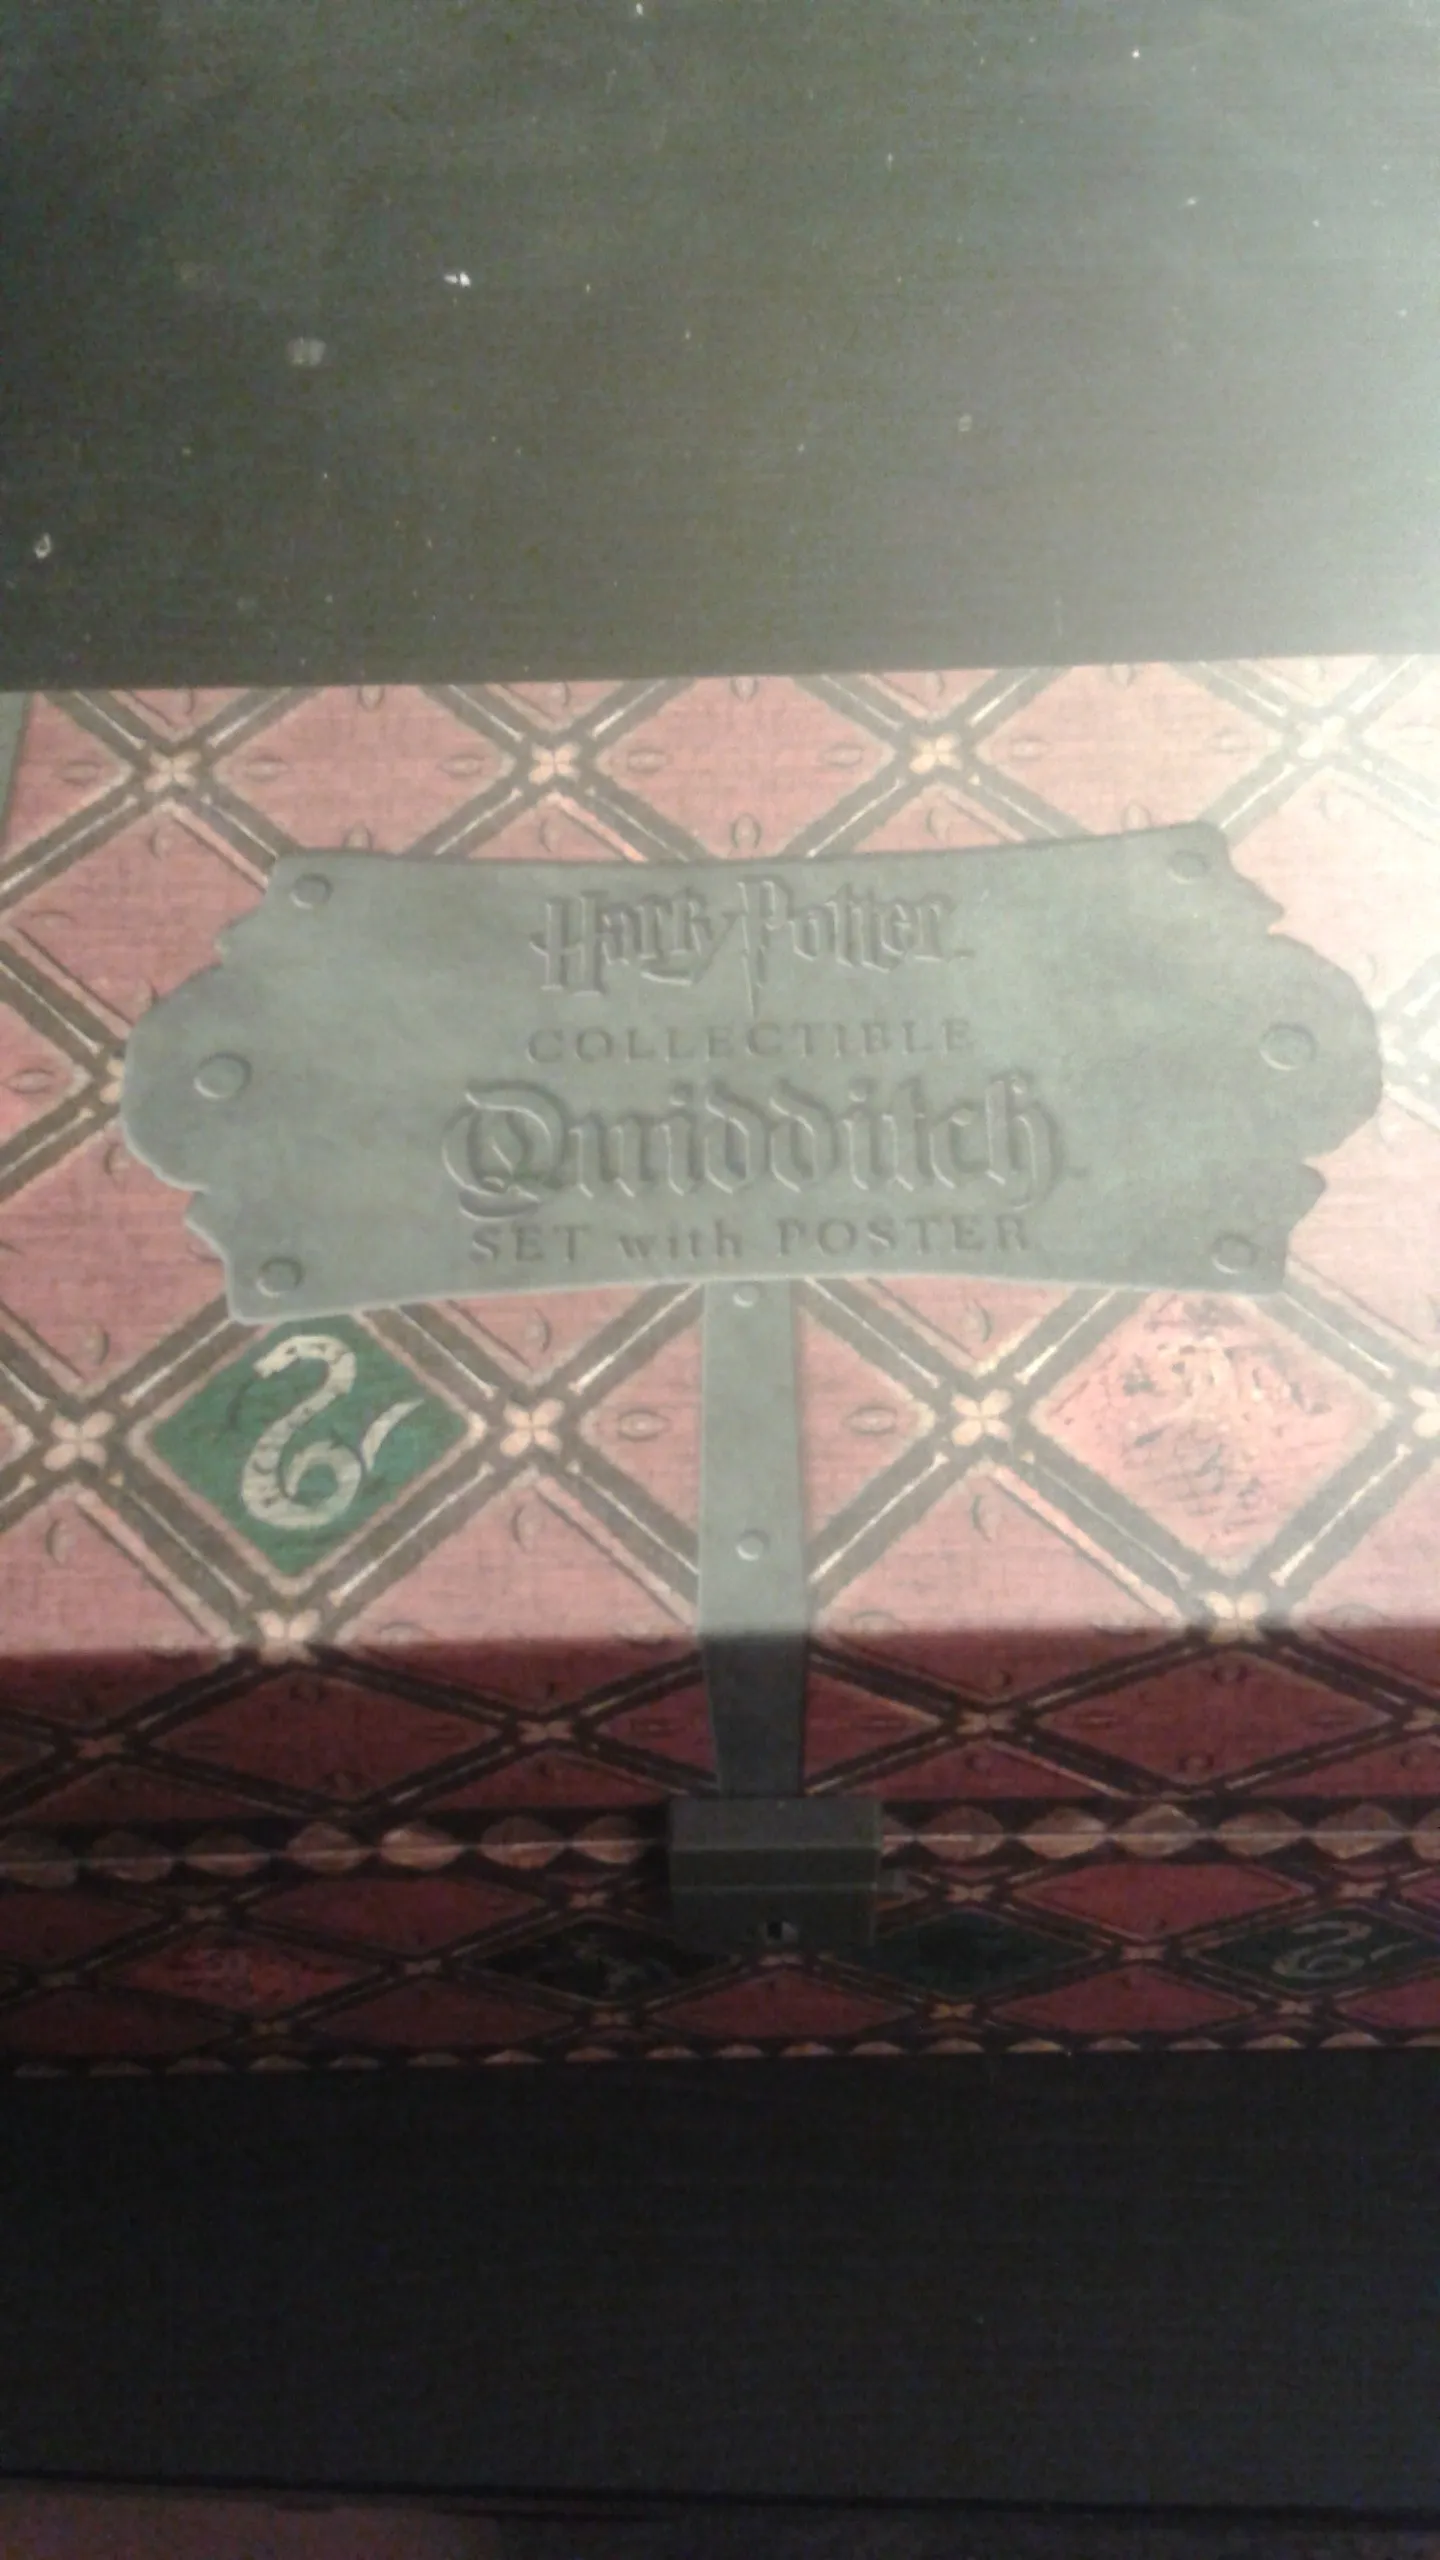 Harry Potter Collectible Quidditch Set Complete With Poster & Keys